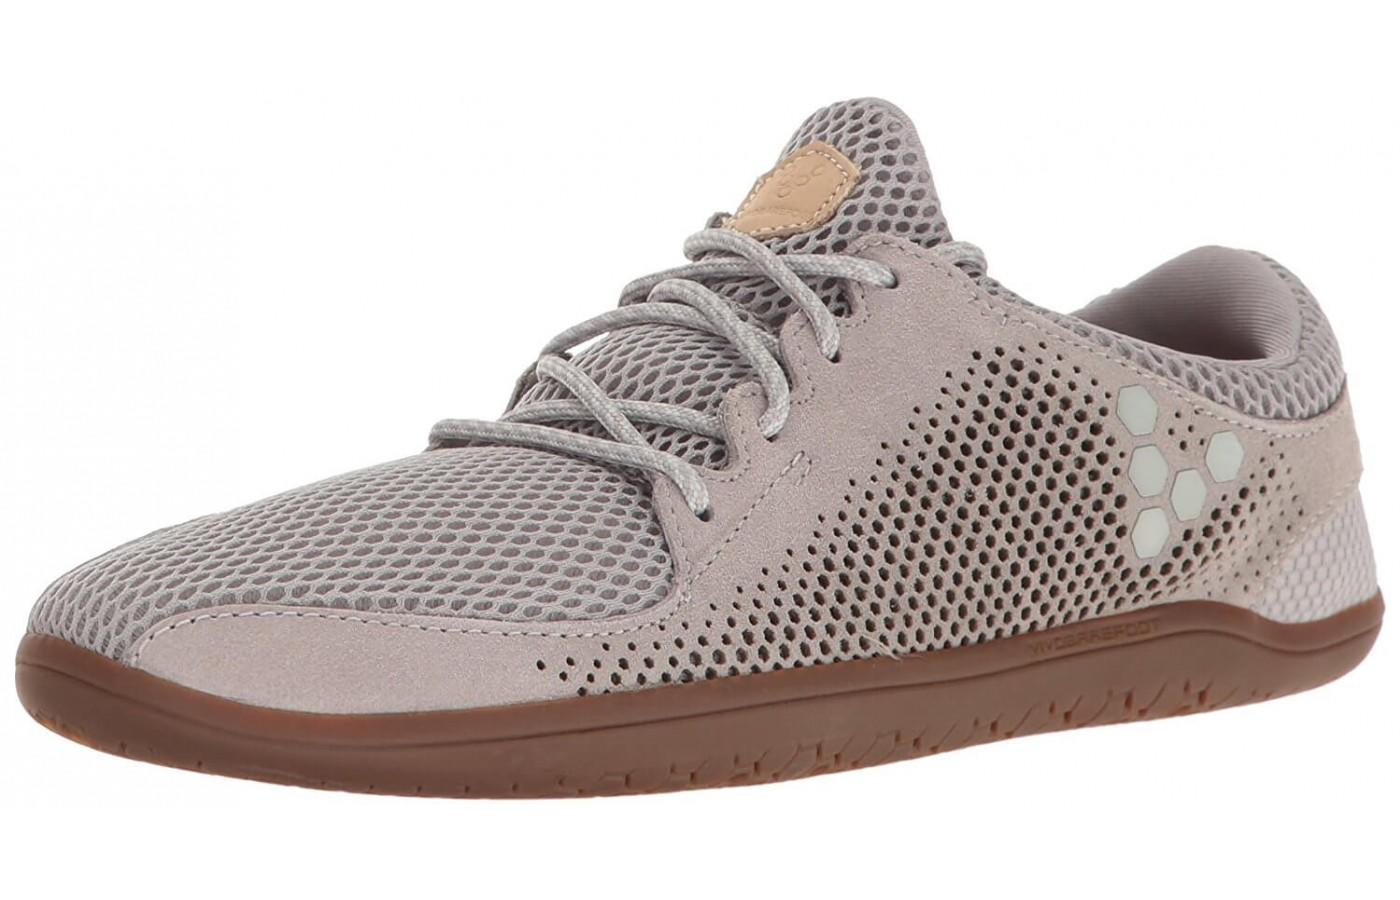 The Vivobarefoot Primus Trio shown from the front/side